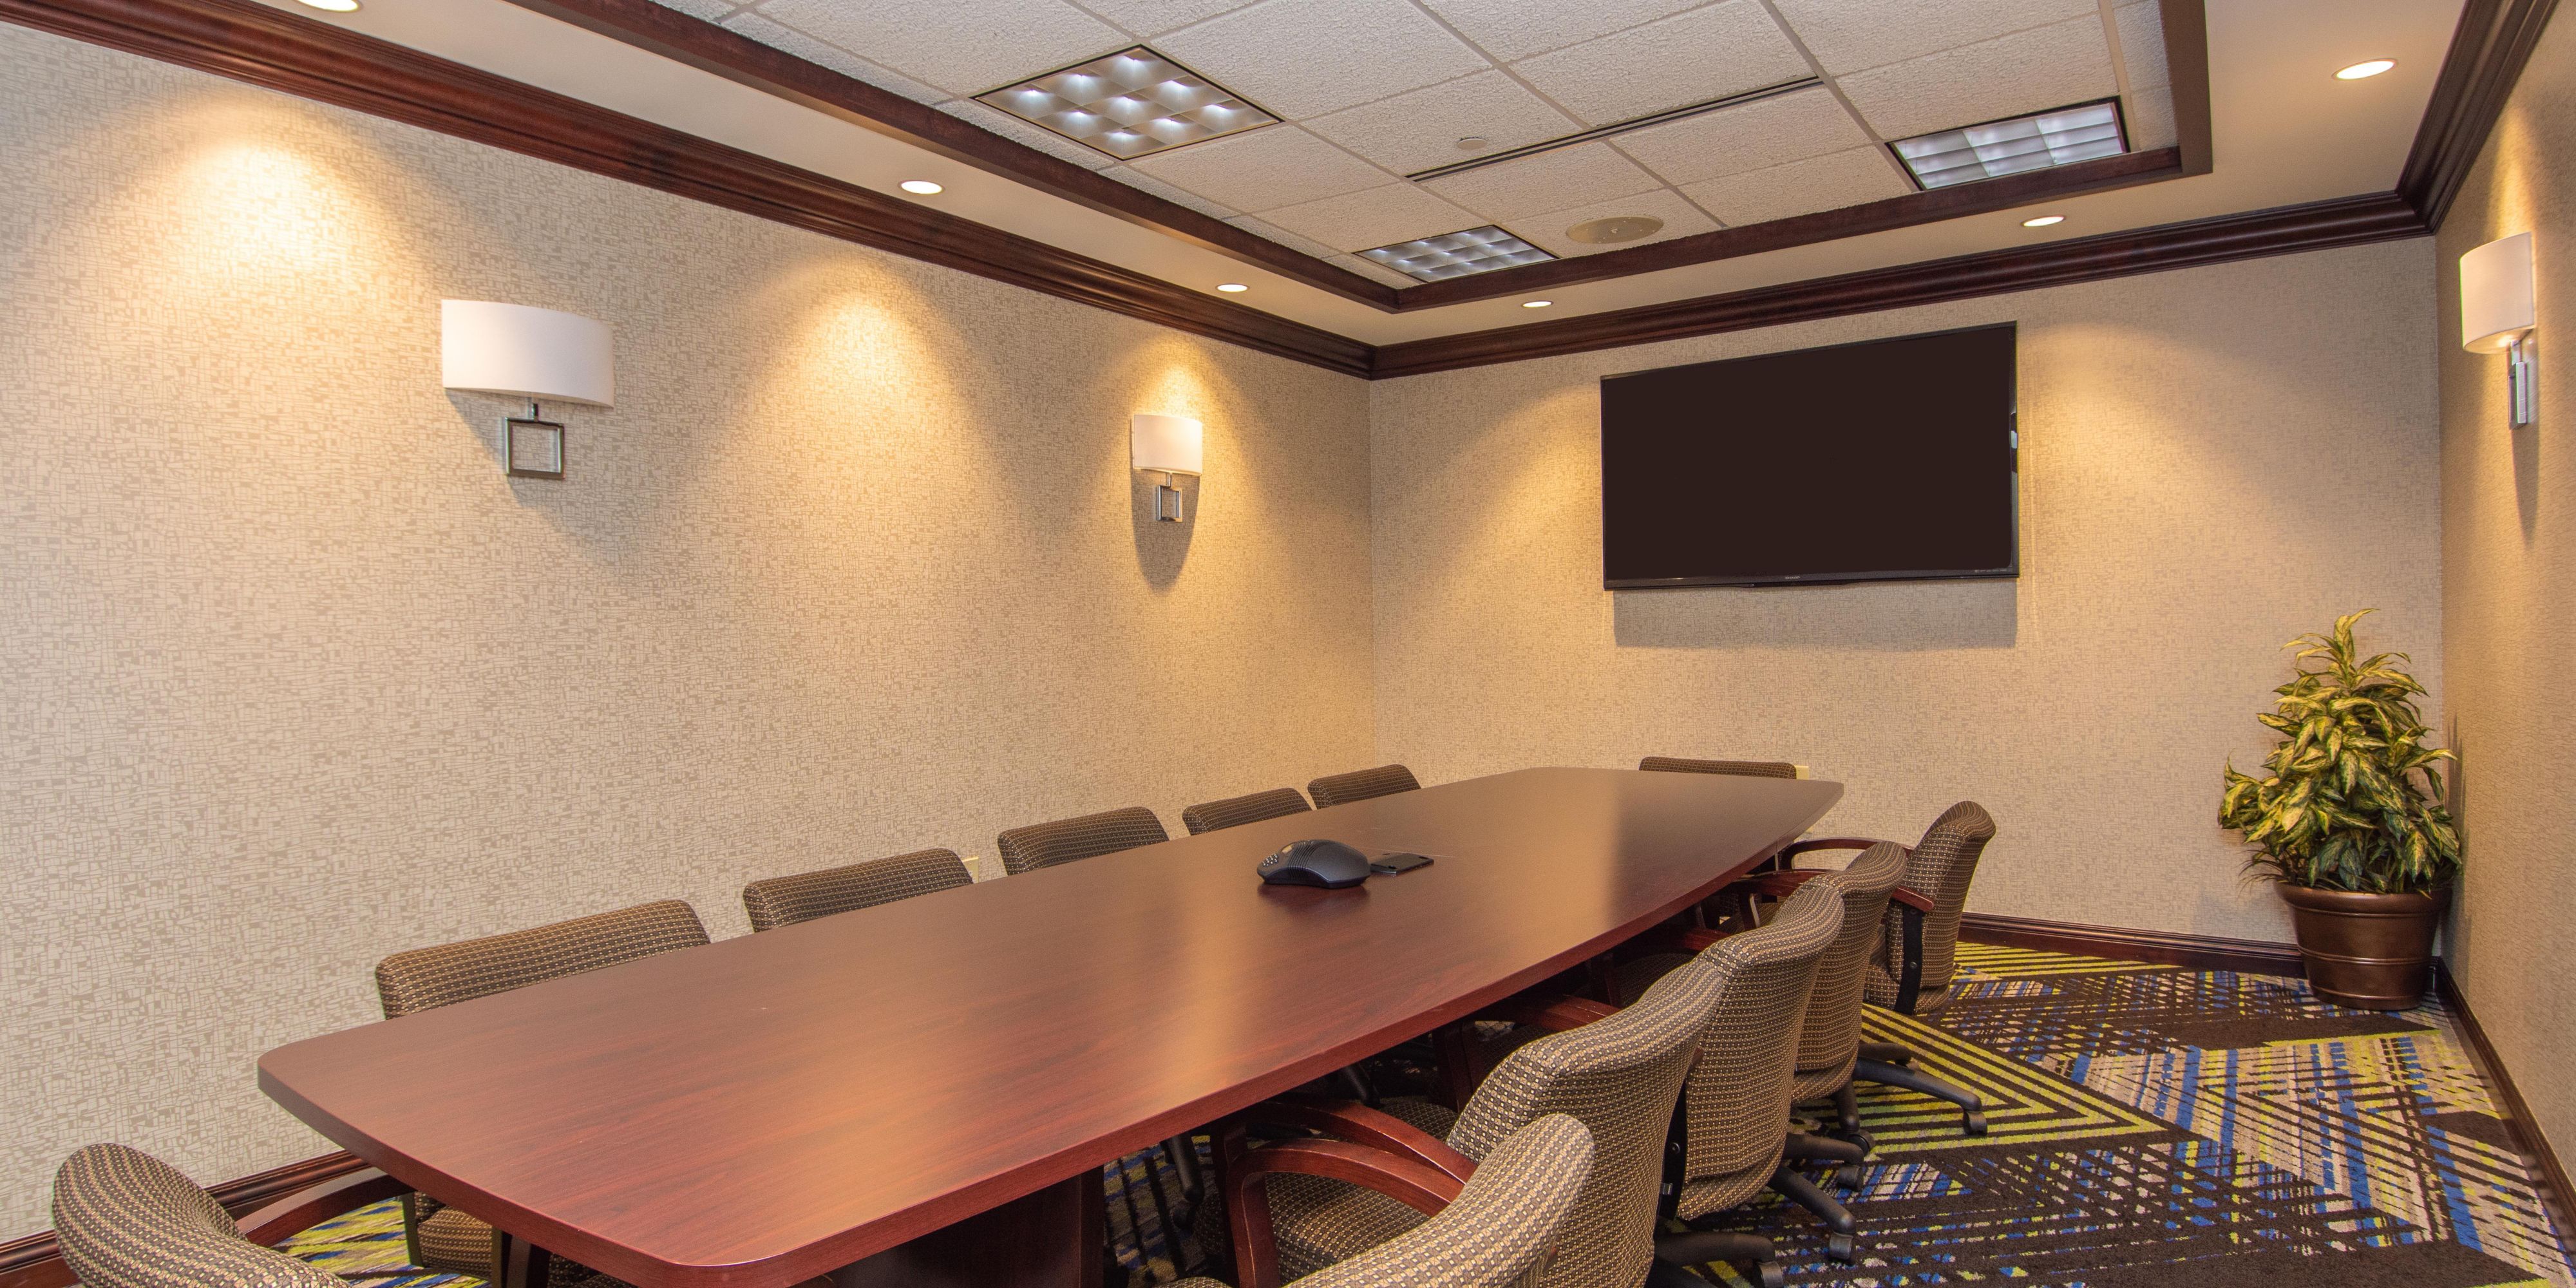 Small meetings play a vital role in the success of many organizations. Are you planning a small corporate meeting, board retreat or brainstorming session?  Our meeting space is sure to lead to big ideas! For groups up to 12 people, we can help! Our Director of Sales is dedicated to making your meeting a huge success!  
